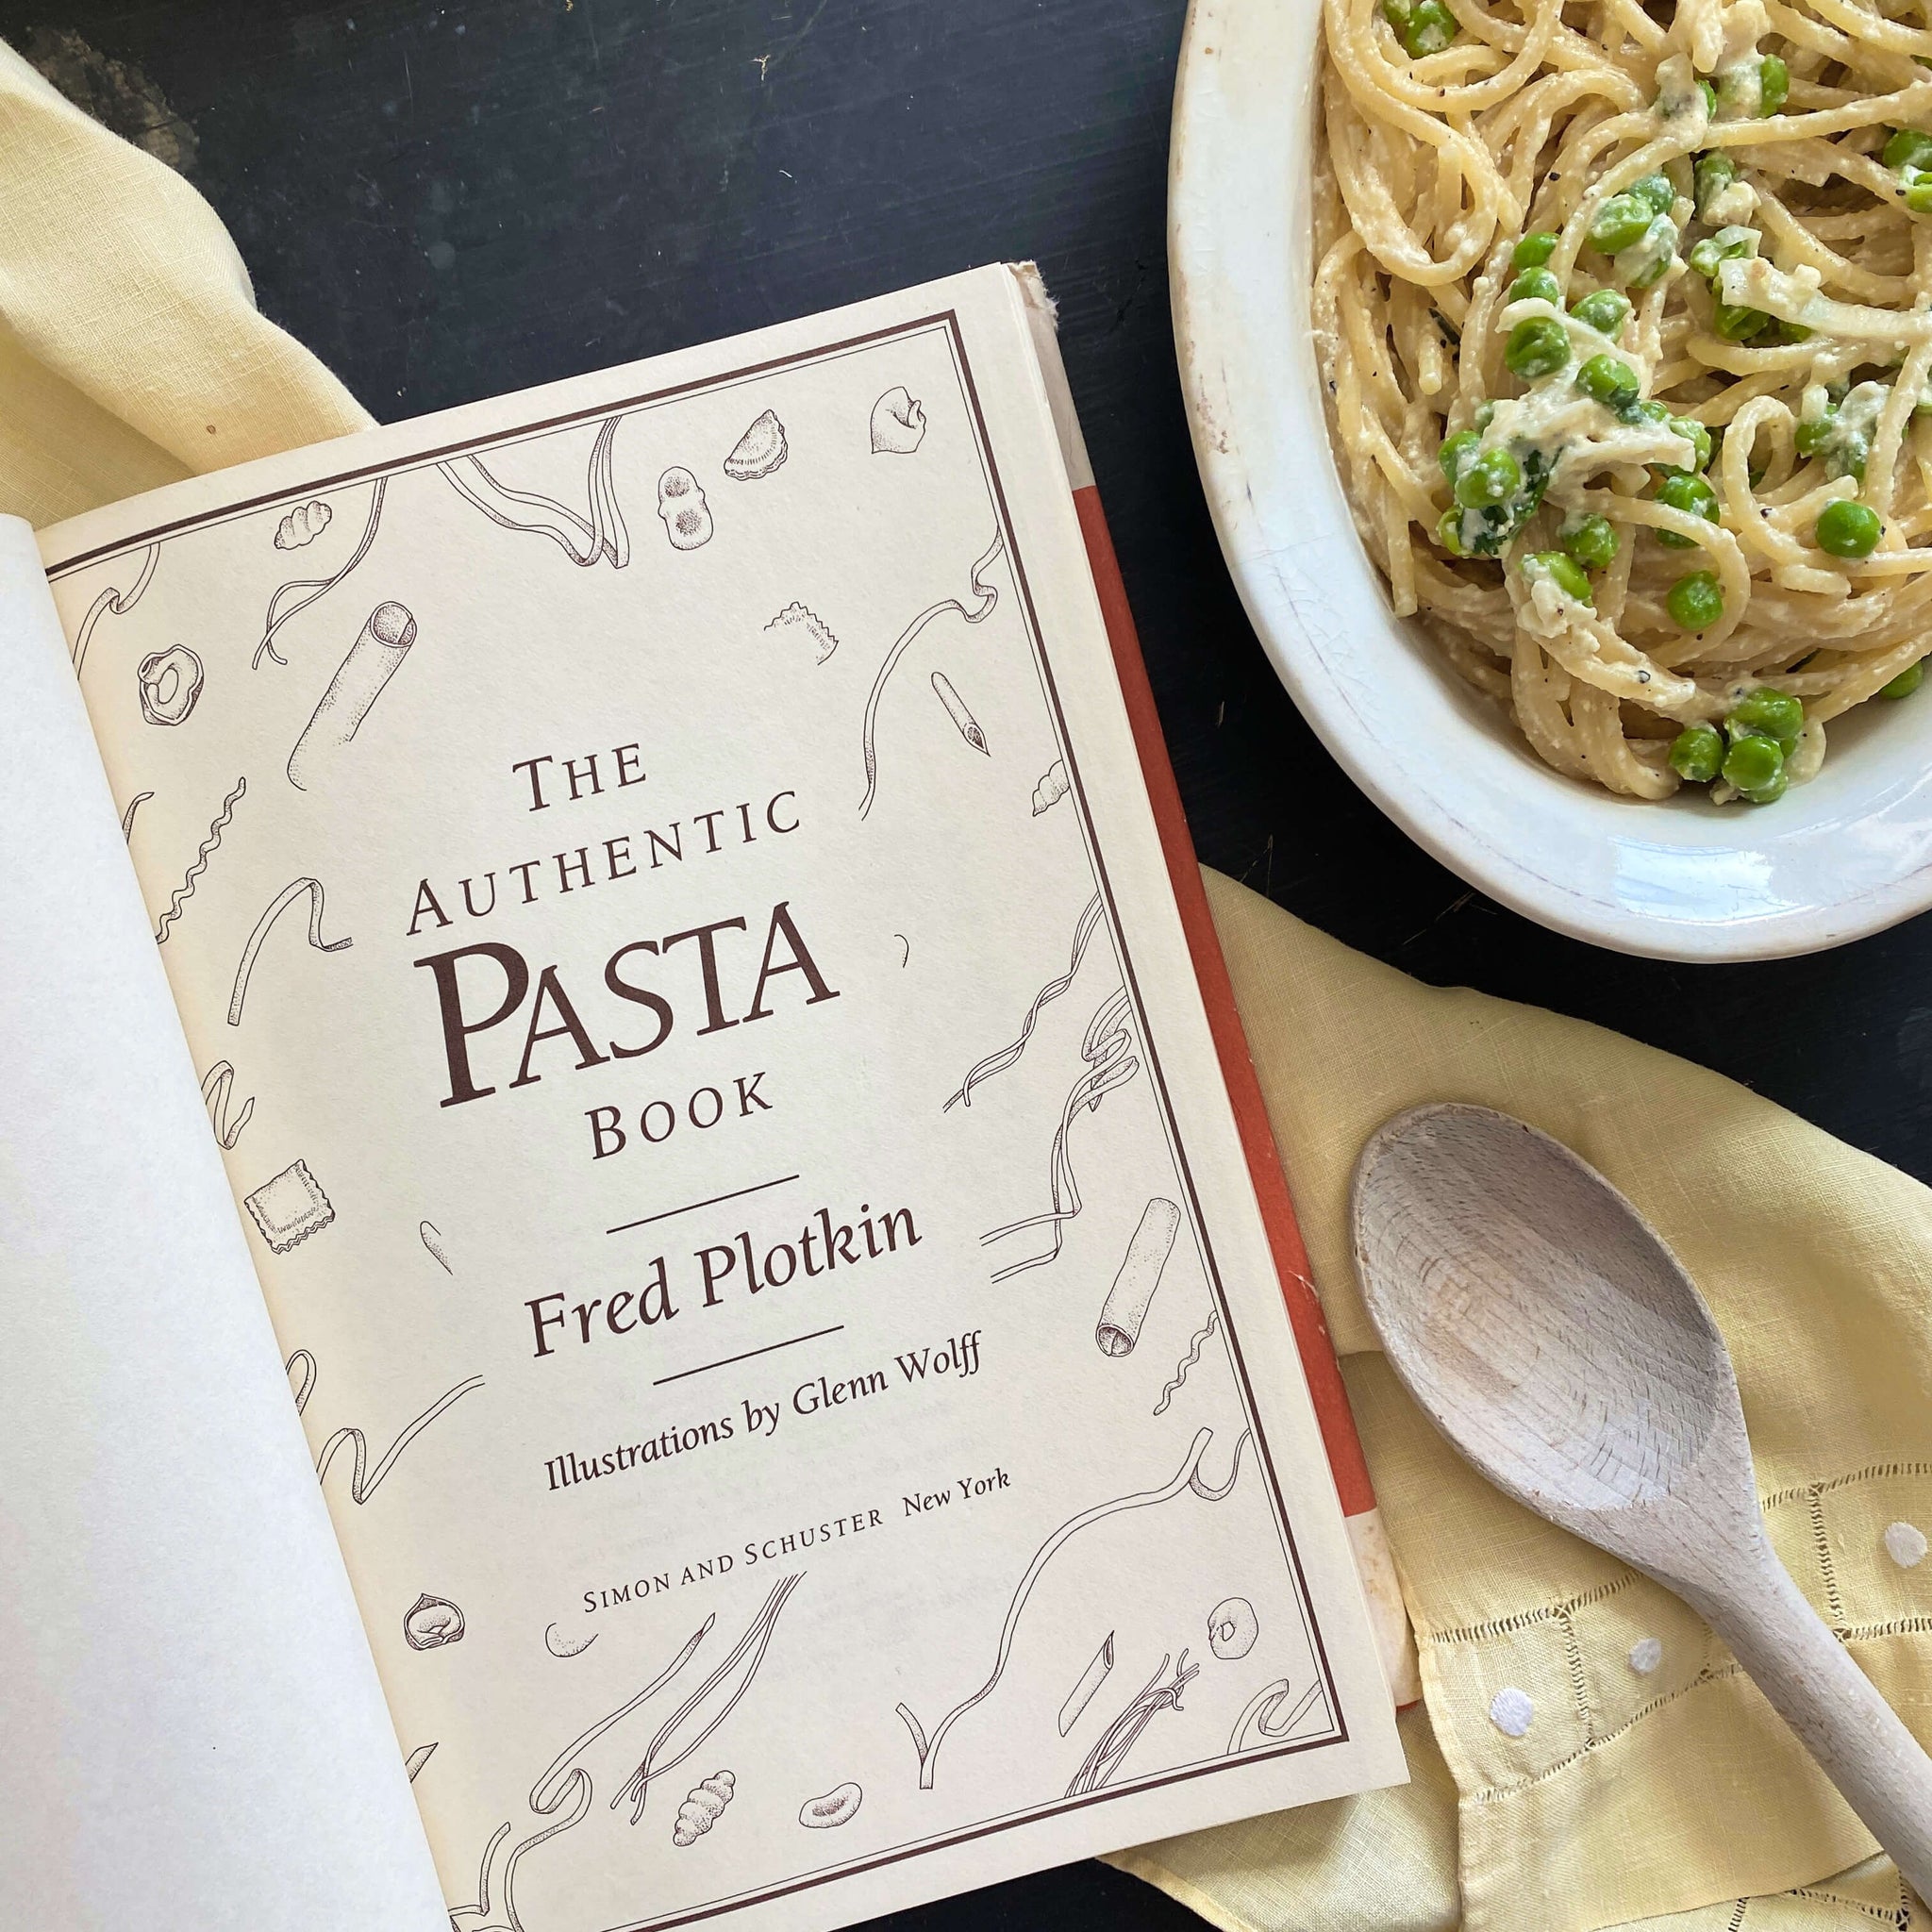 The Authentic Pasta Book - Fred Plotkin - 1985 Edition